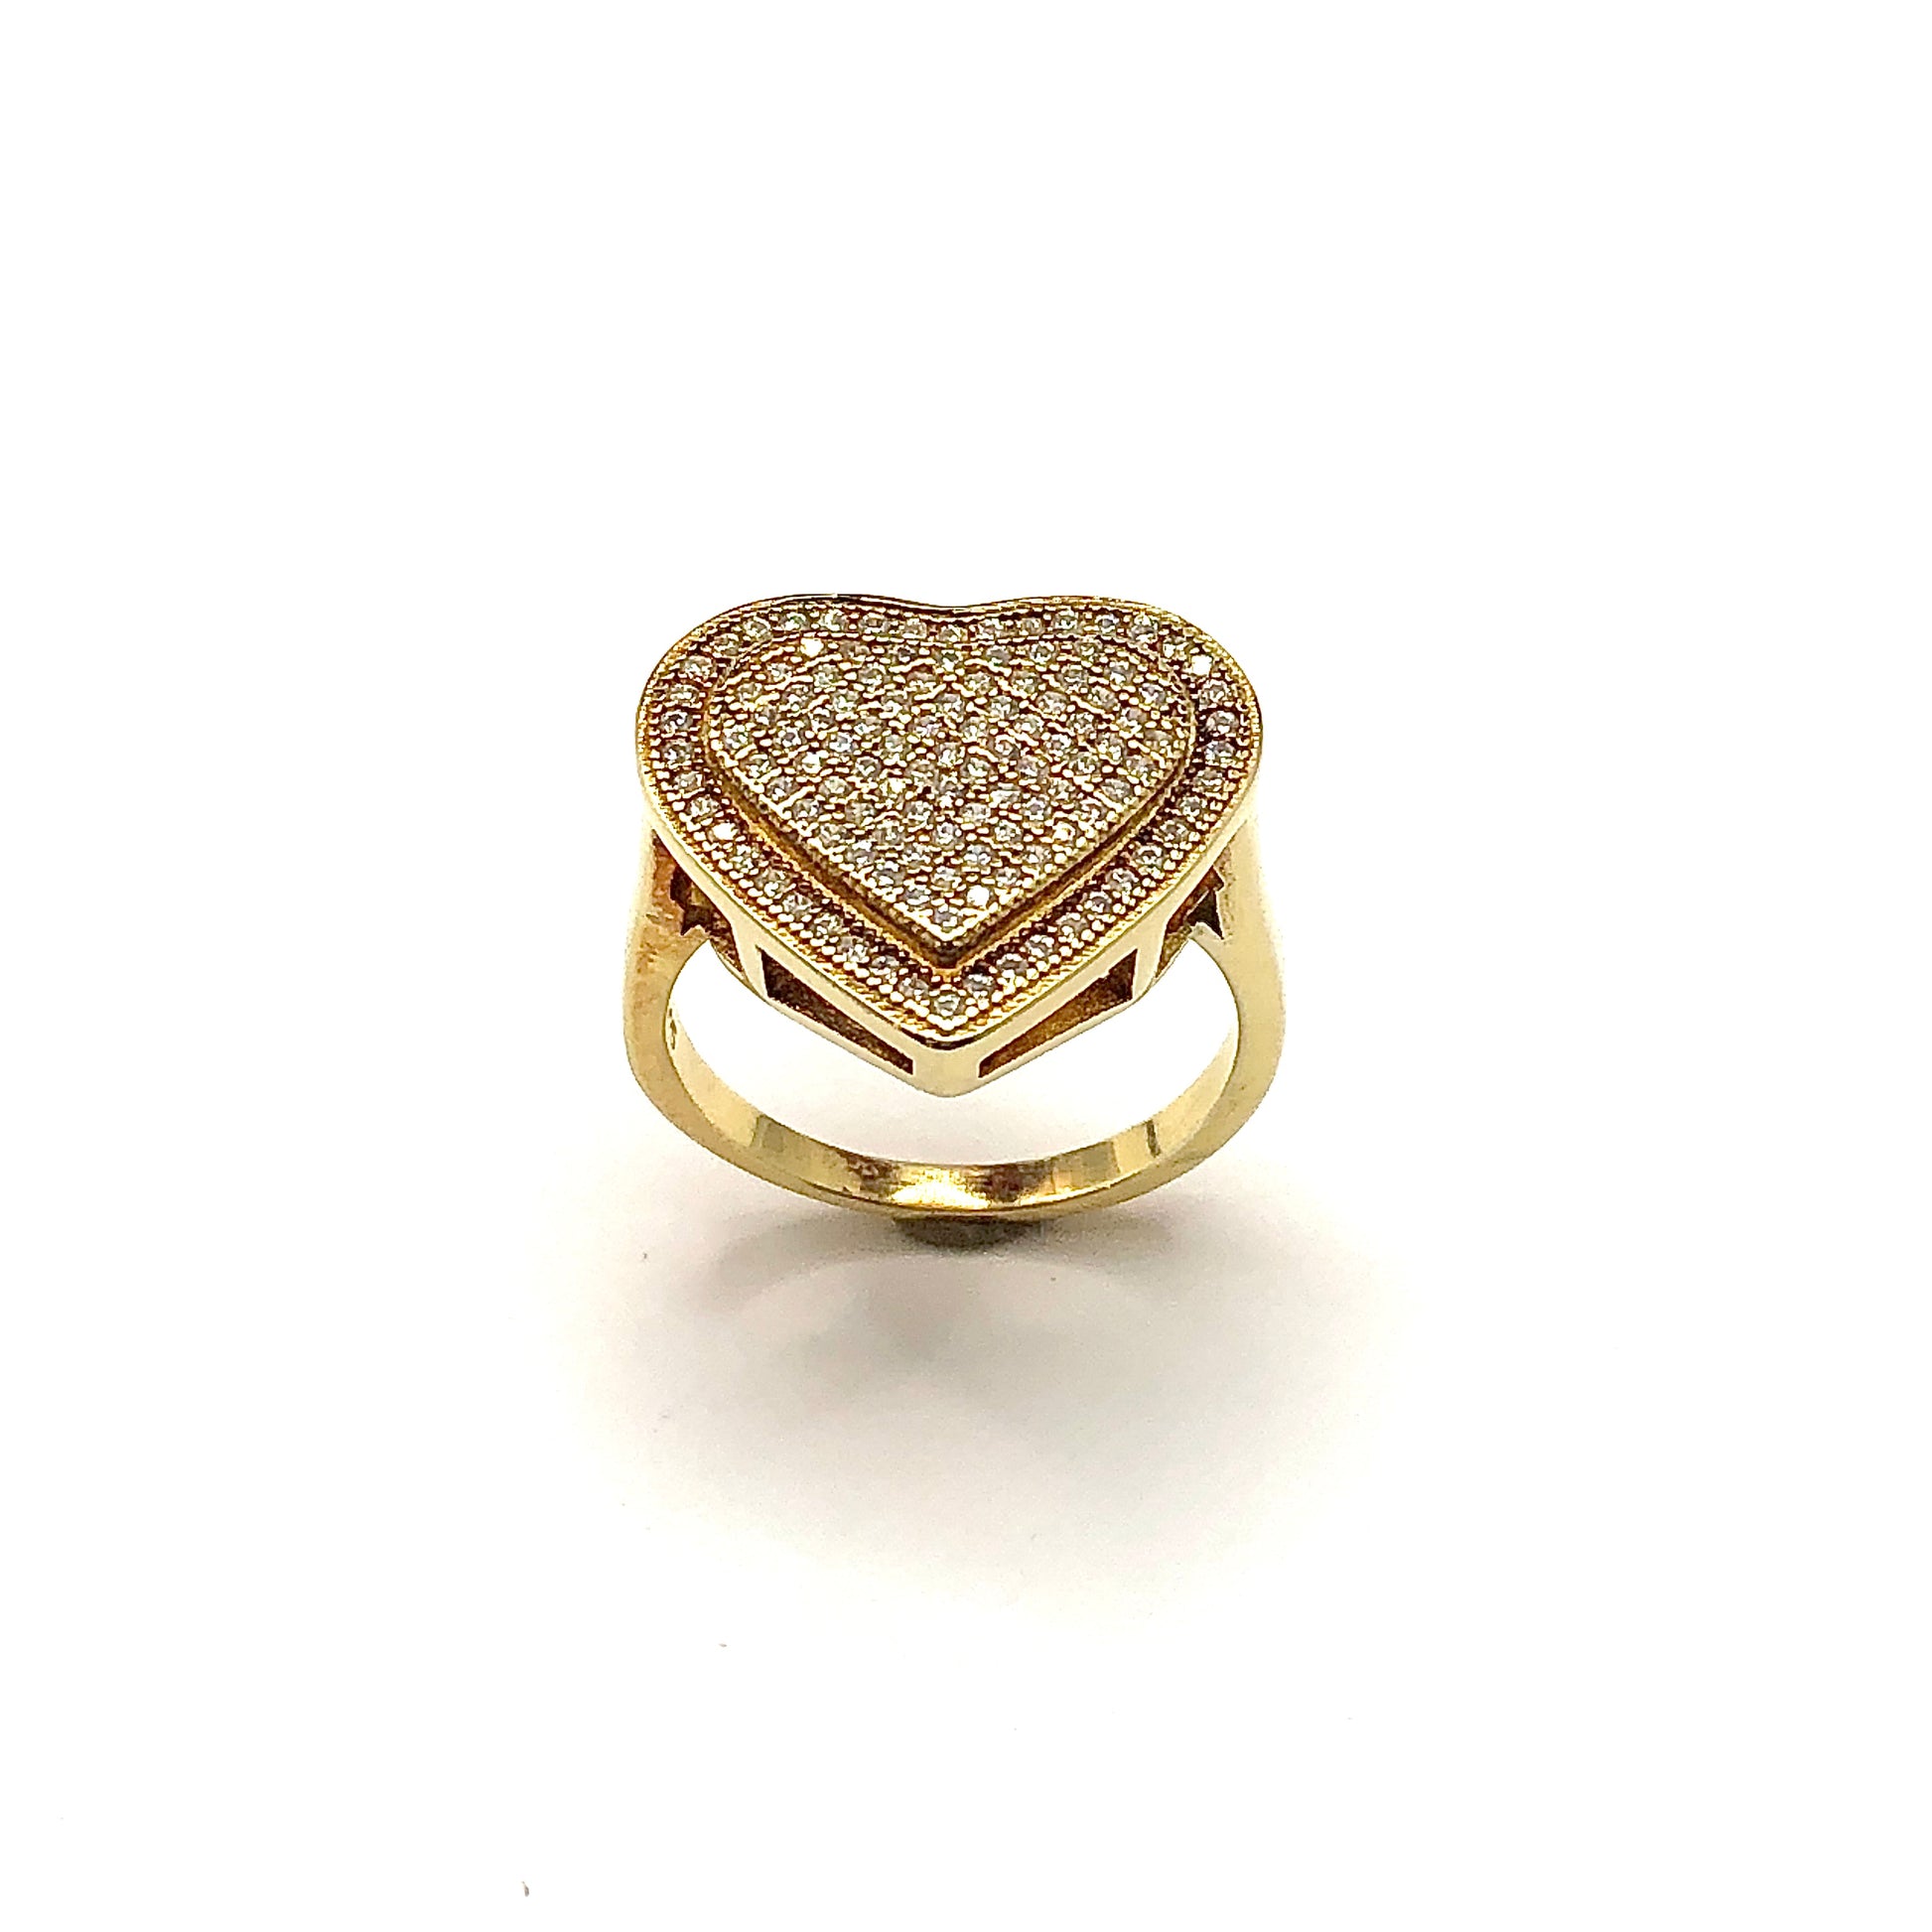 Ring - Fashionista Style Shimmery Sterling Silver Gold 2 Tier Heart Ring - sz7 - Crazy Extremely Low Priced Fine Jewelry